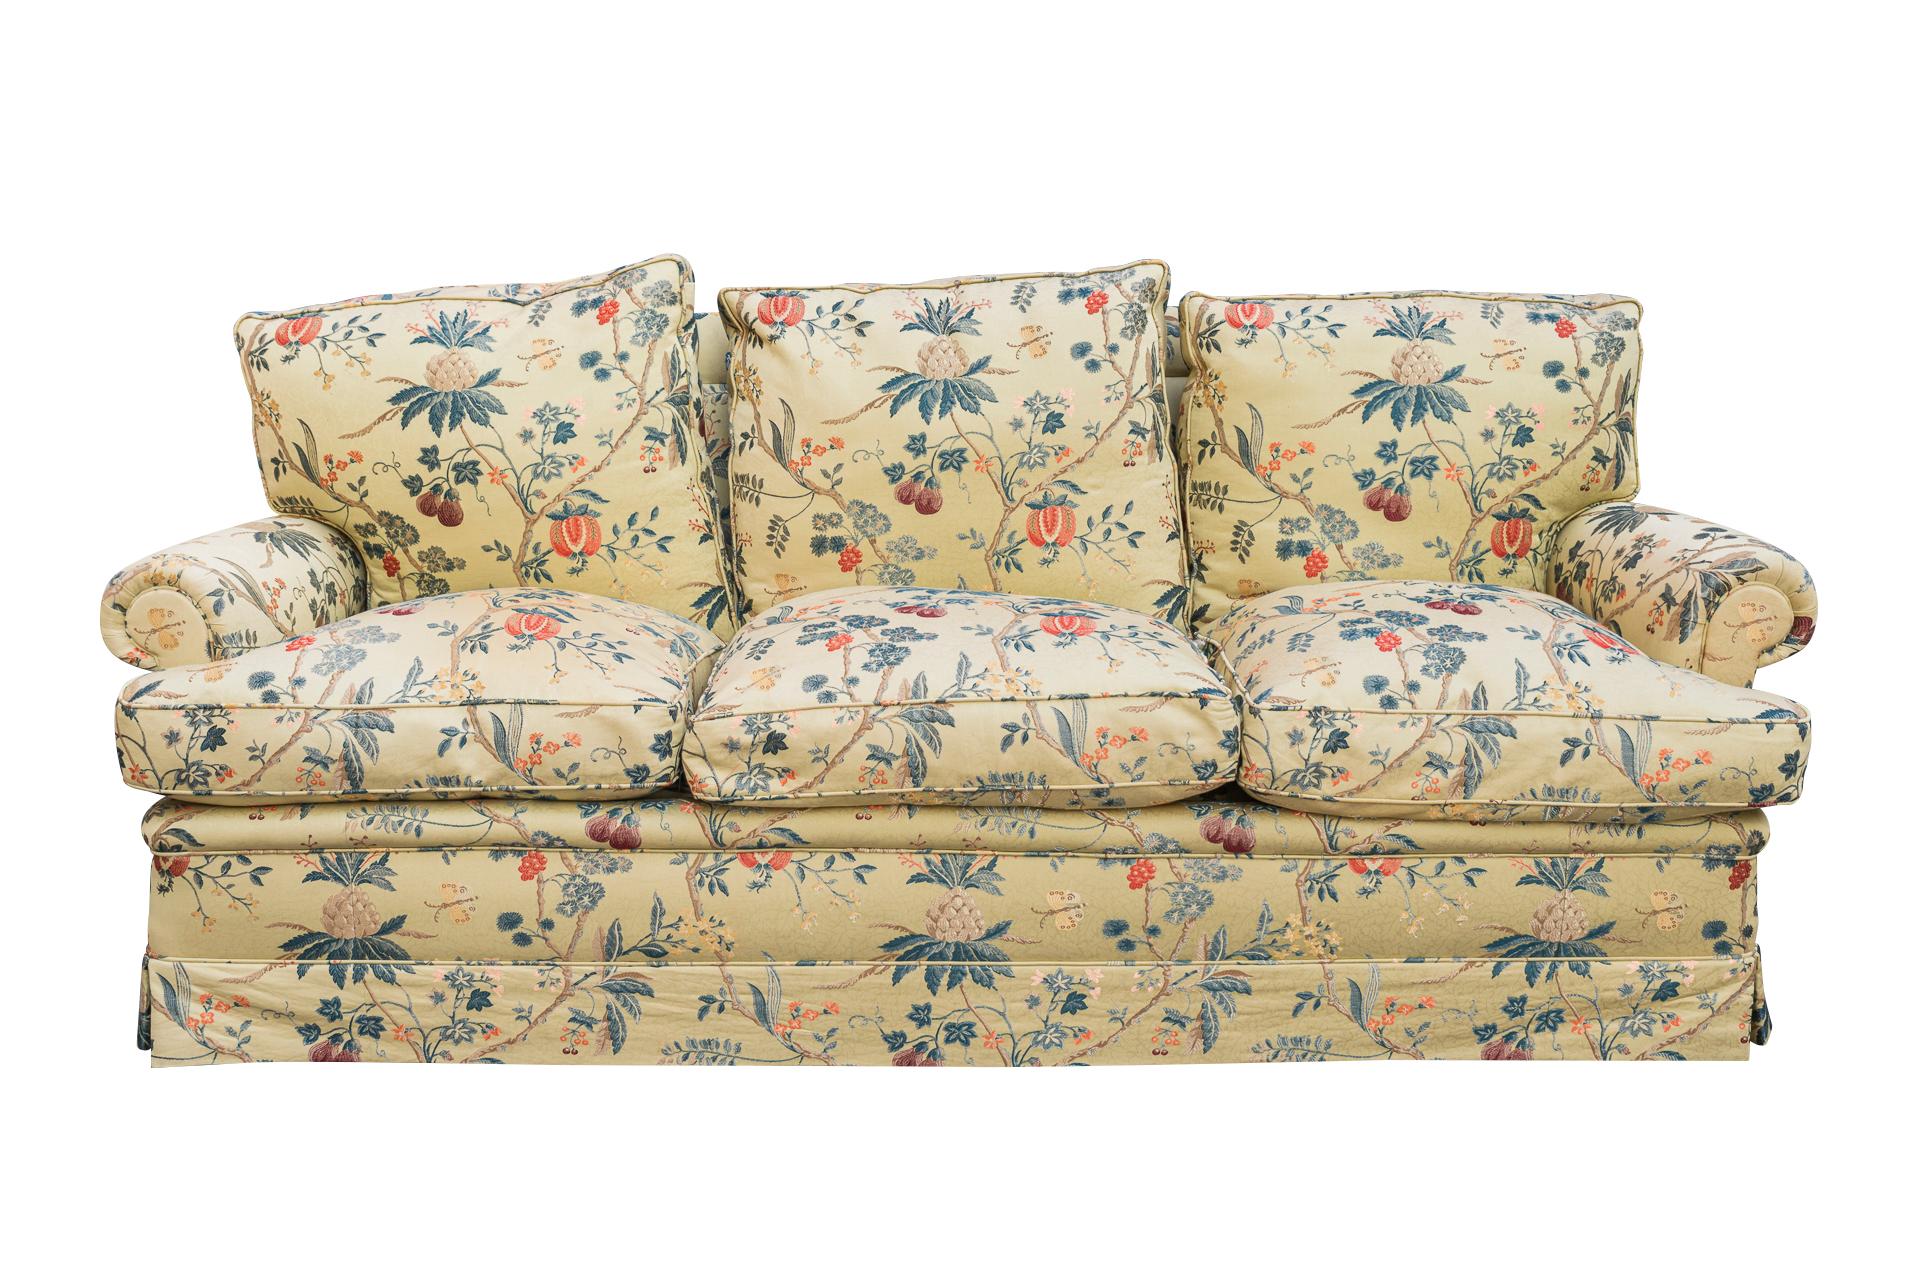 Living Room Set made of one three seat sofa and two armchairs,
Silk fabric decorated with flowers, in perfect condition,
France, circa 1970.

Measures:
(Sofa) Width 205 cm, Depth 88 cm, Height 85 cm.
(Armchairs) Width 88 cm, Depth 85 cm,